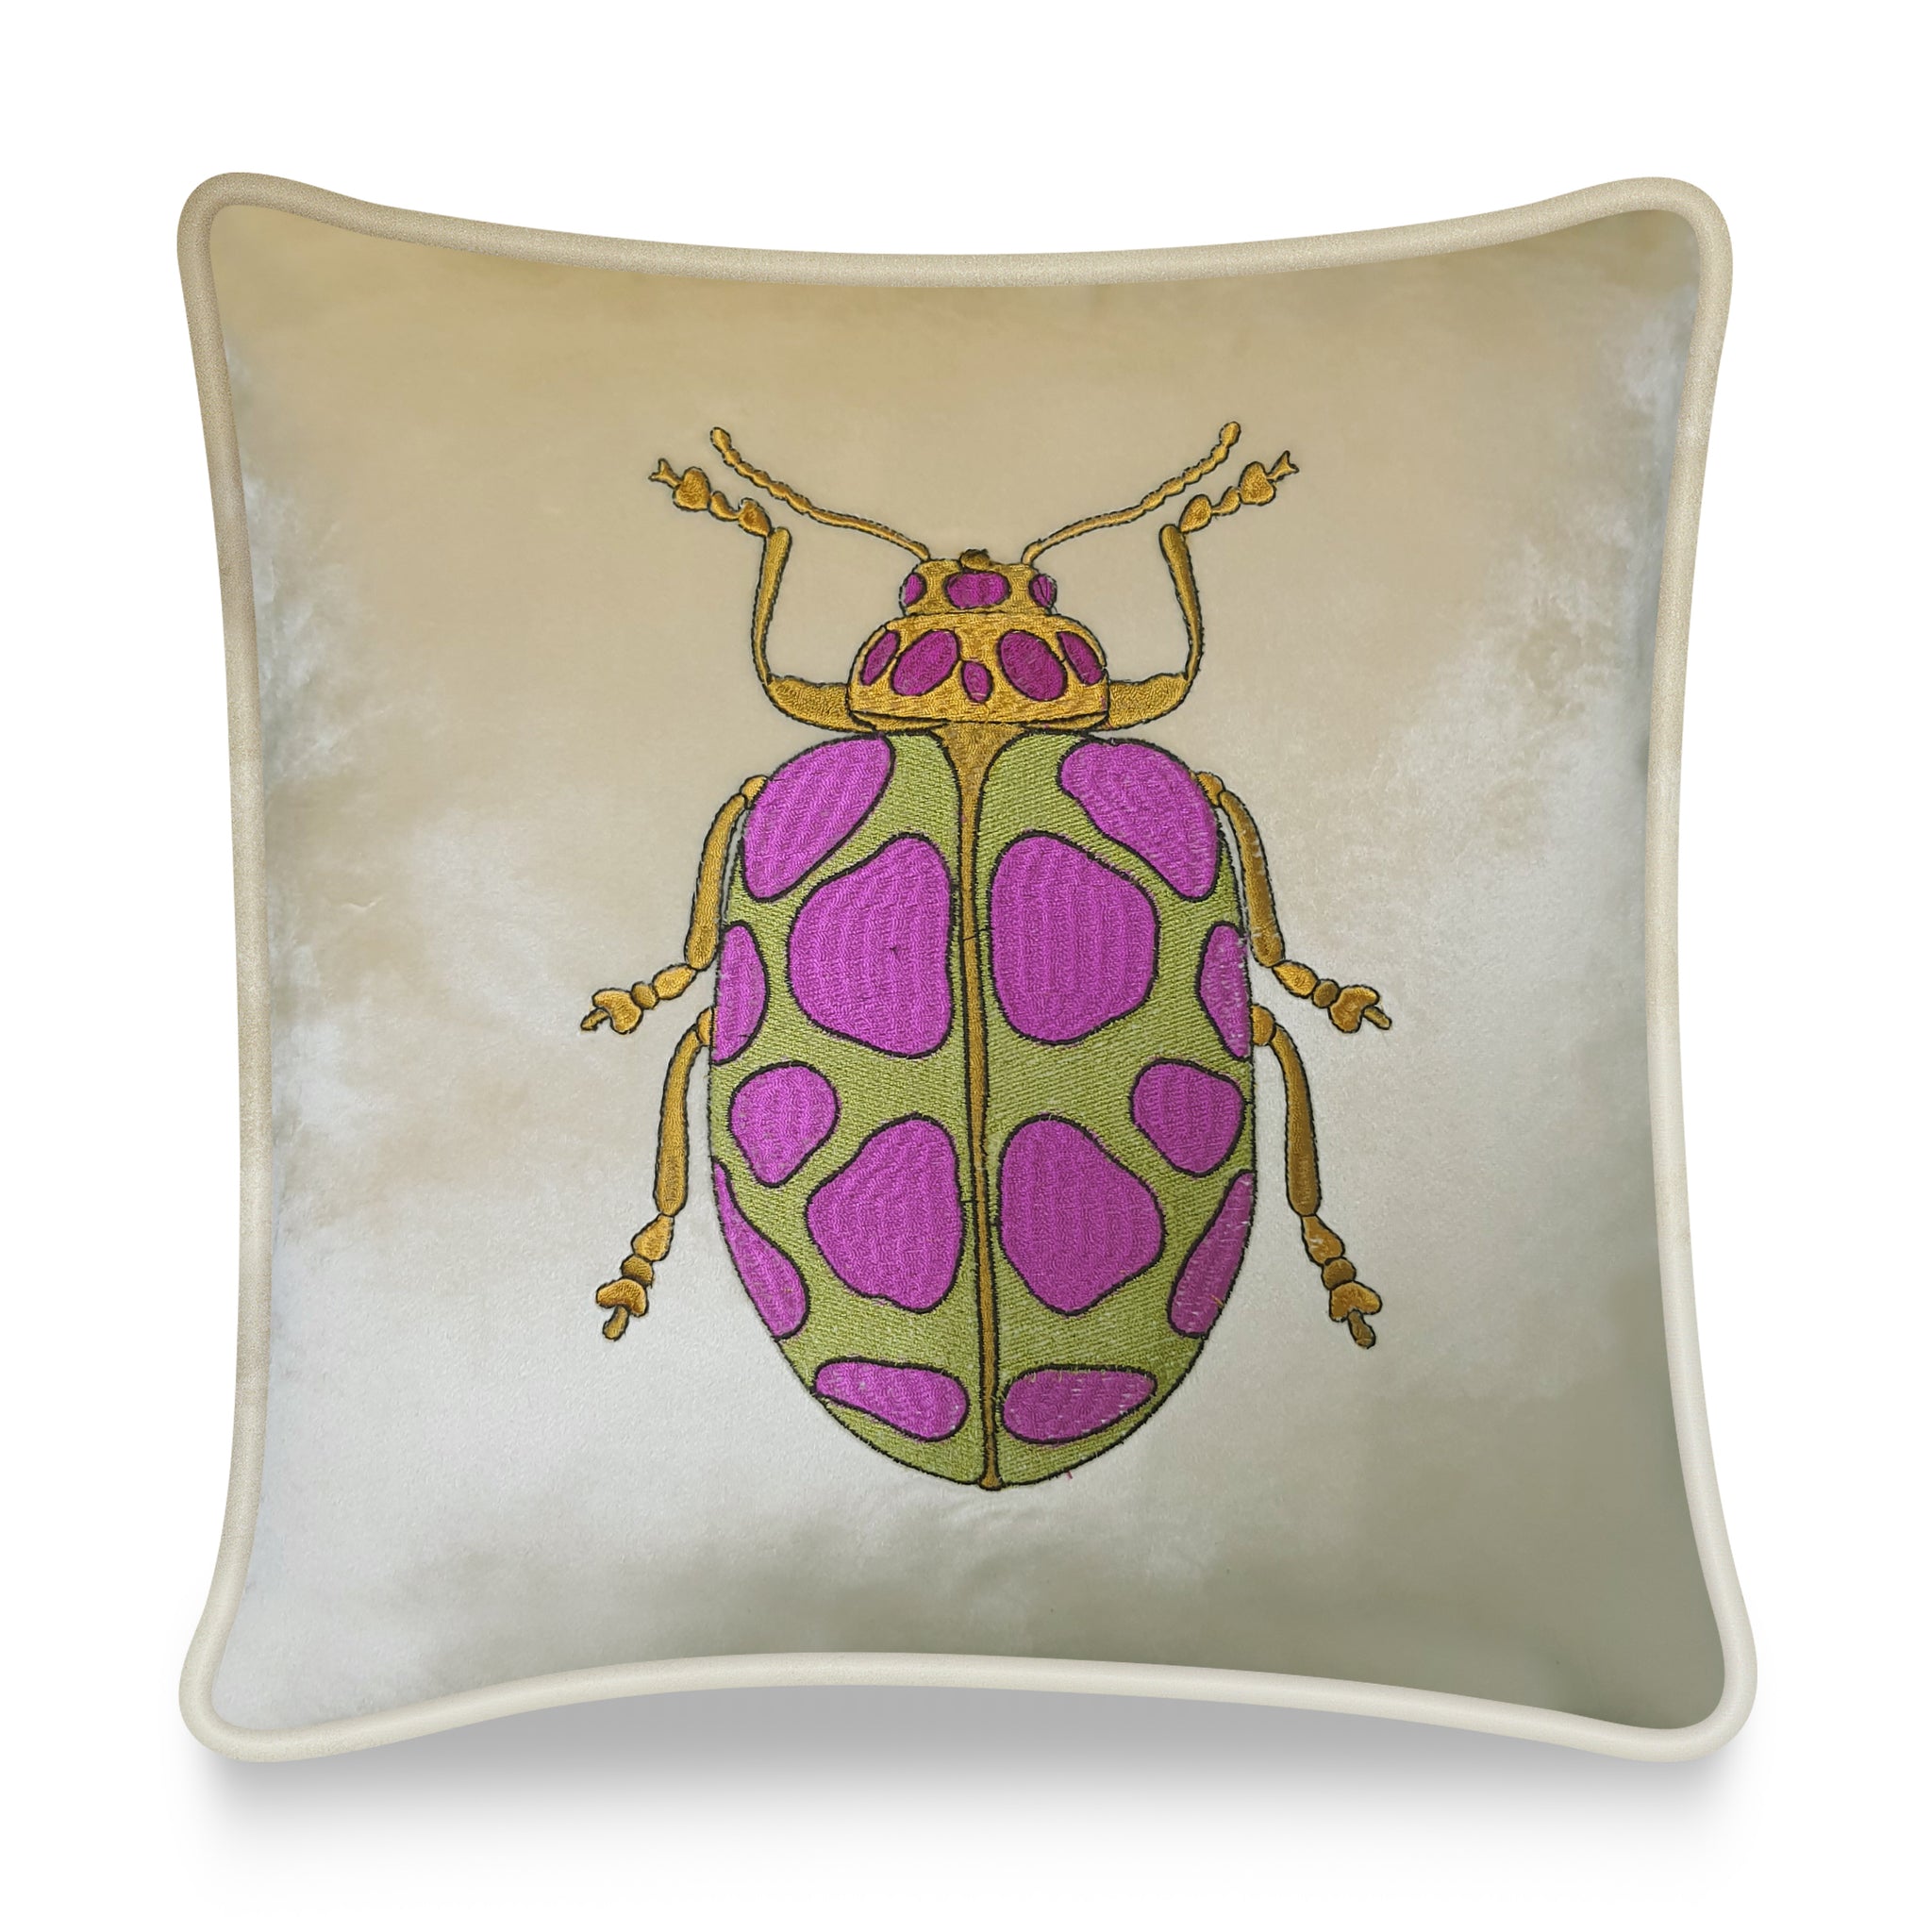  Velvet Cushion Cover Colorful Beetle Embroidery Decorative Pillowcase Modern Home Decor Throw Pillow for Sofa Chair Living Room 45x45 cm 